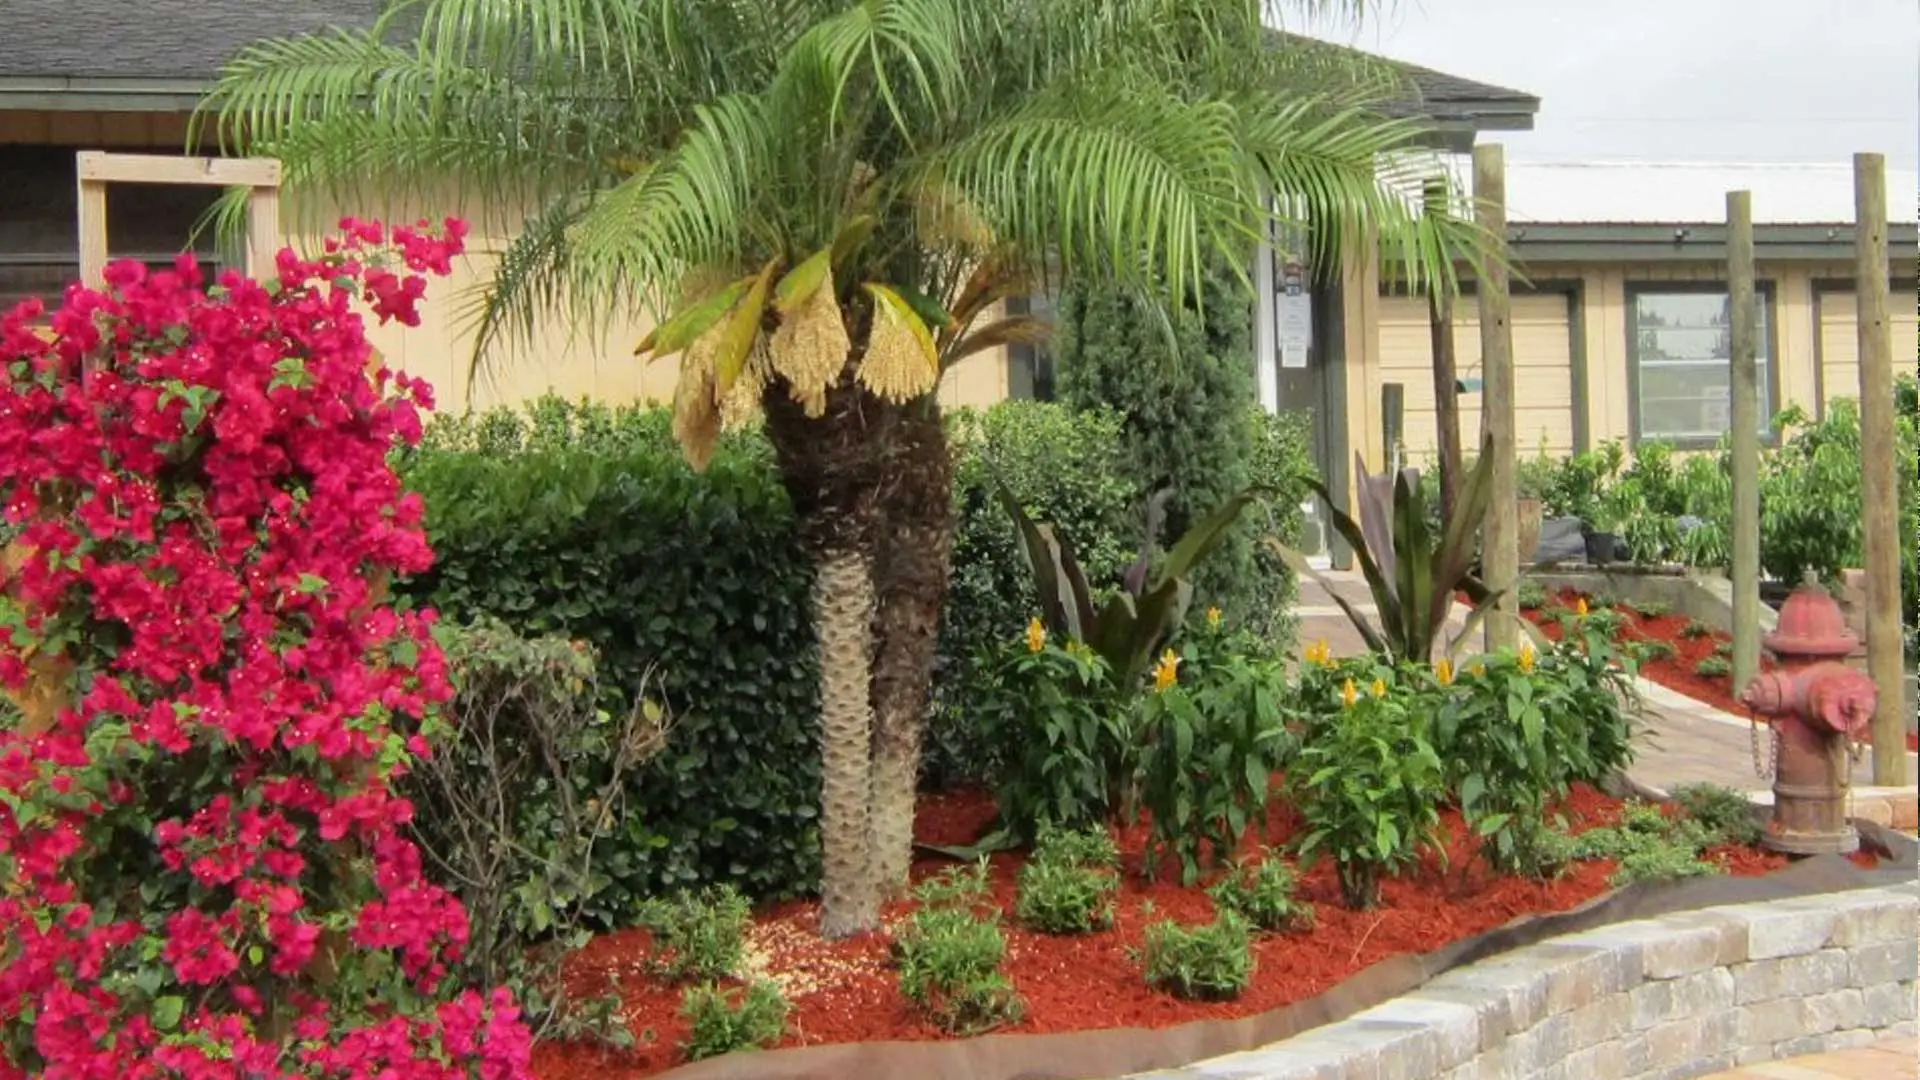 The landscaping at the front entrance to our nursery featuring a Bougainvillea, Pygmy Date Palm planted inside of a raised planter bed.